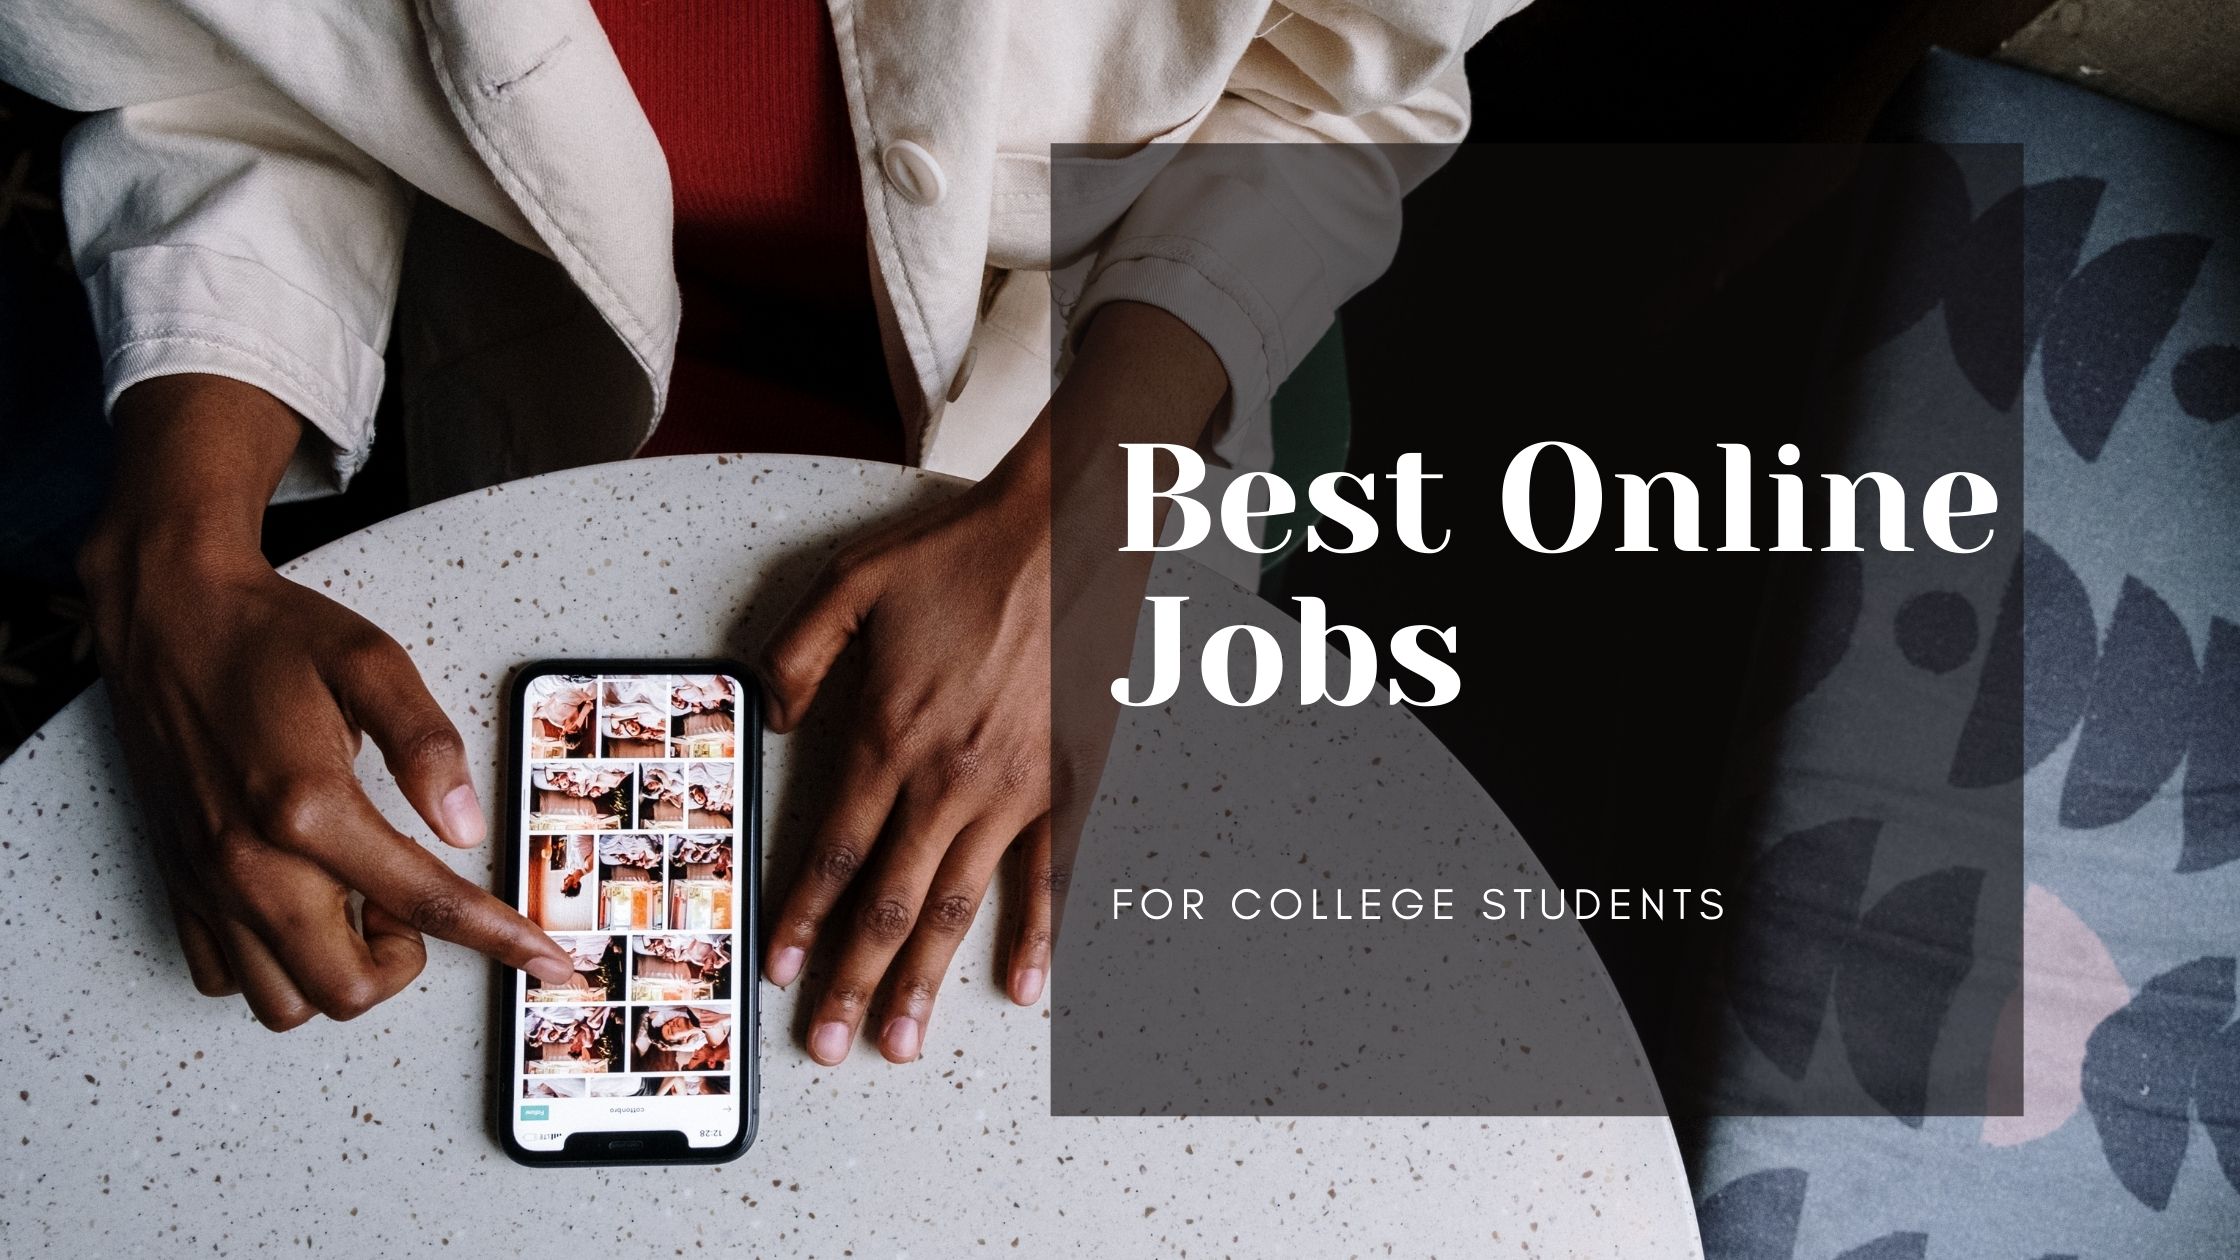 There are a number of options for online jobs for college students, and the best way to find the right one is to do some research.